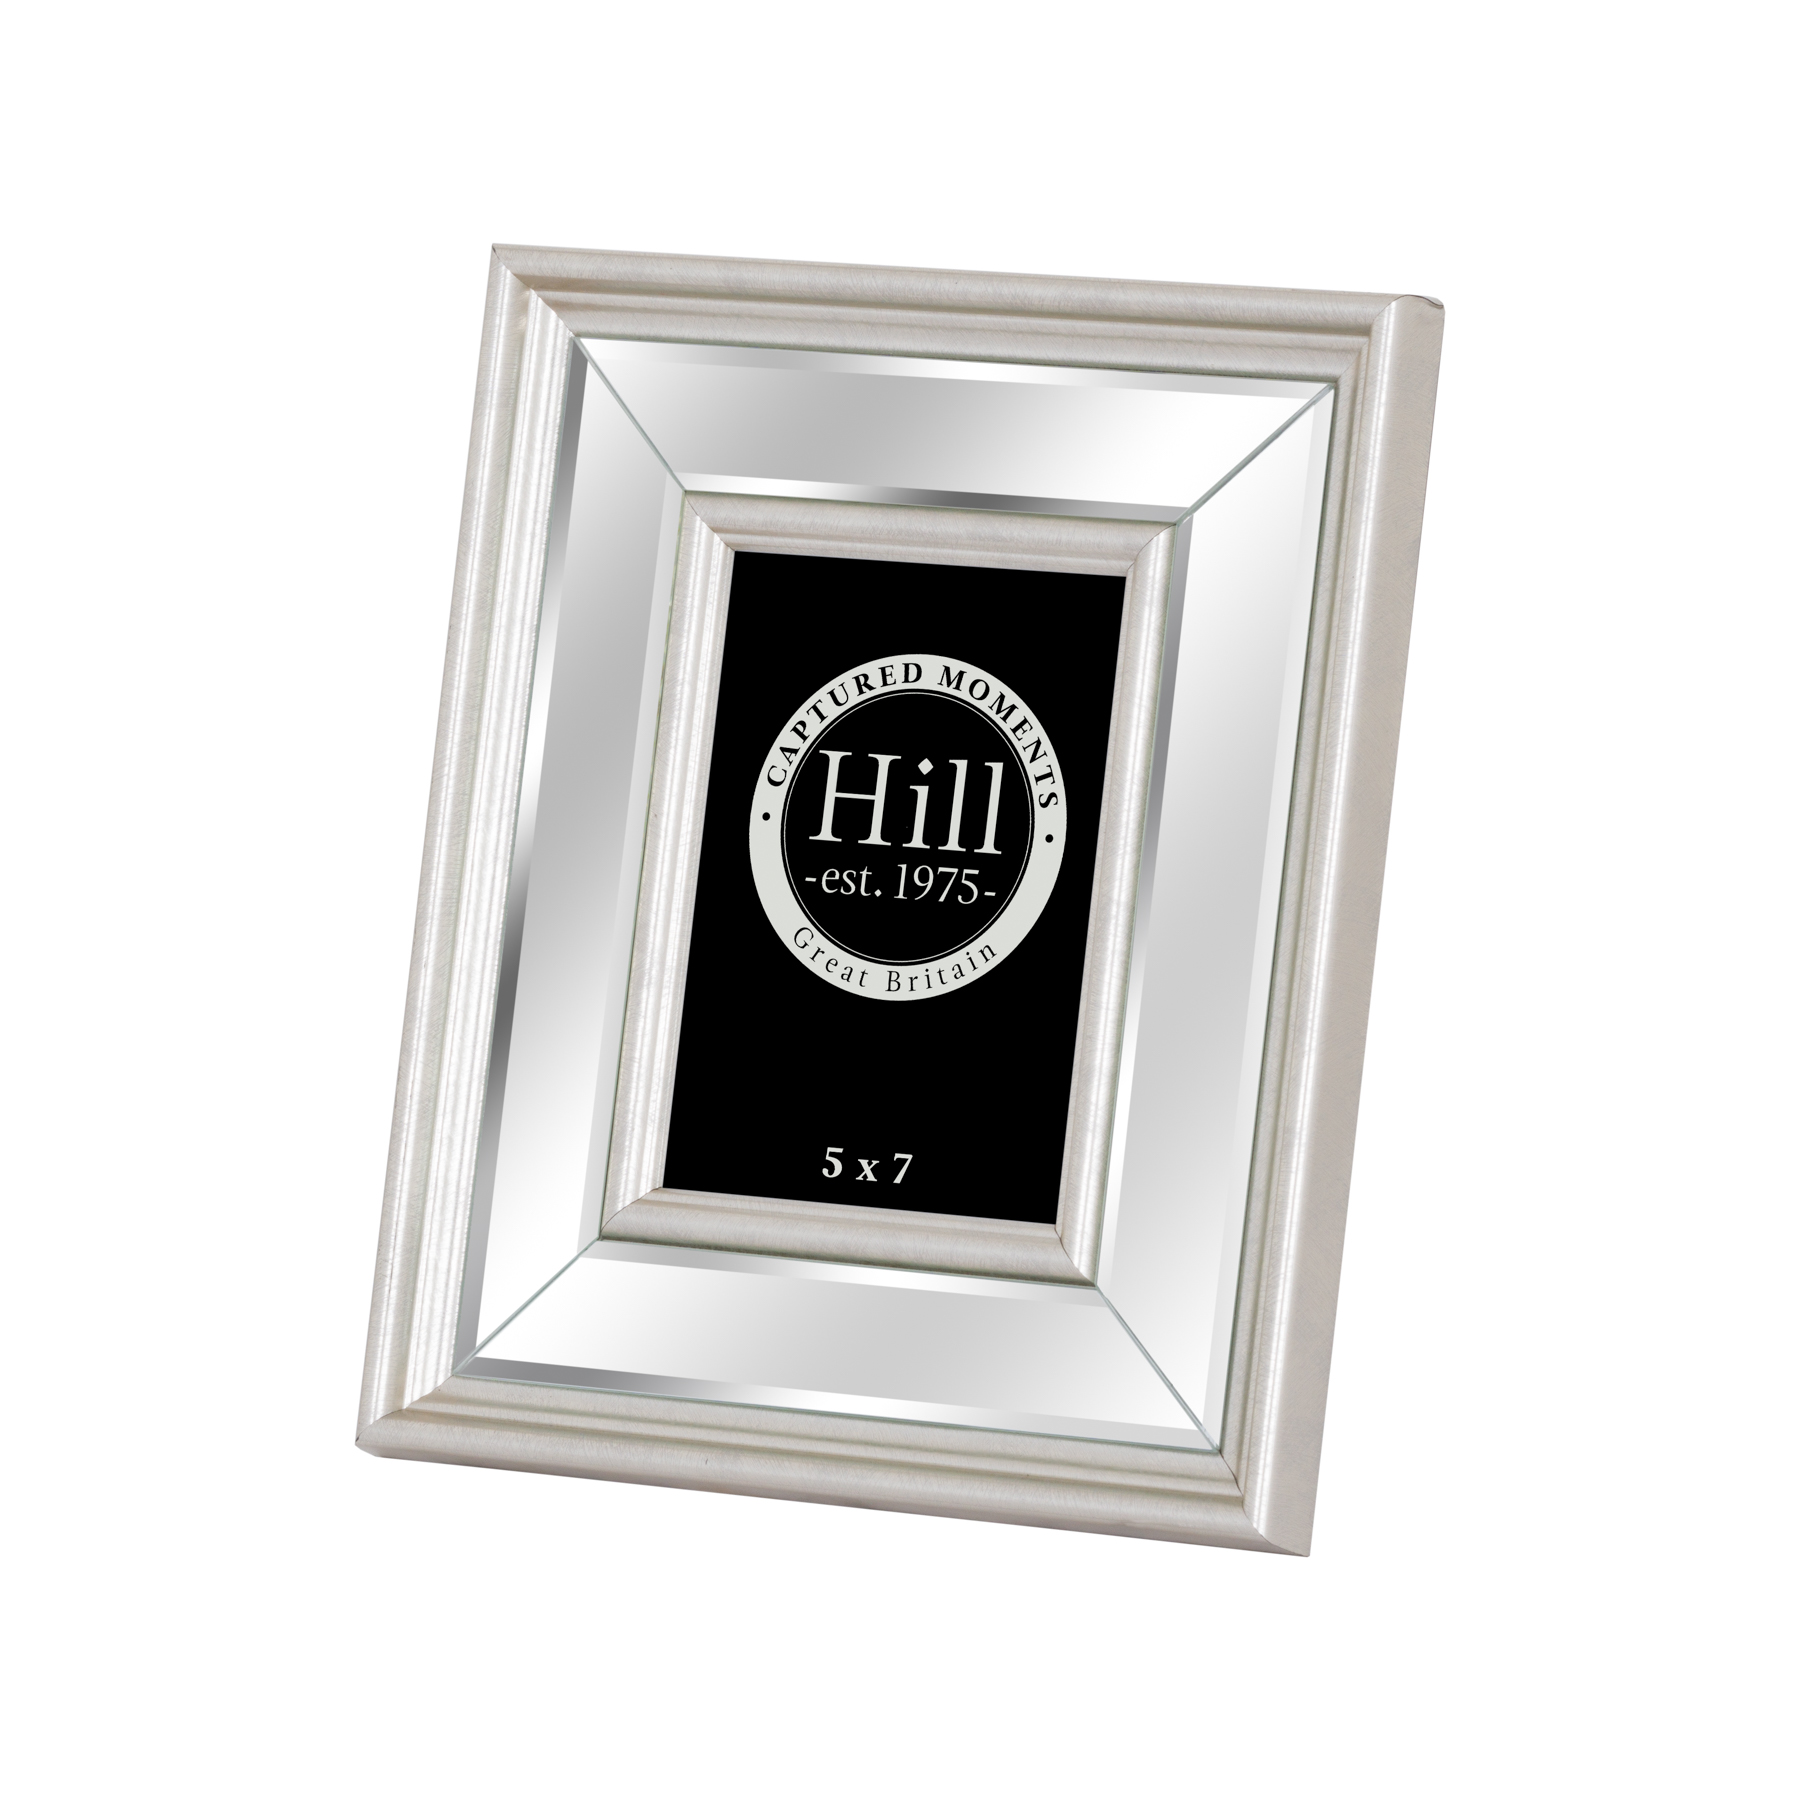 Silver Bevelled Mirrored Photo Frame 5X7 - Image 1